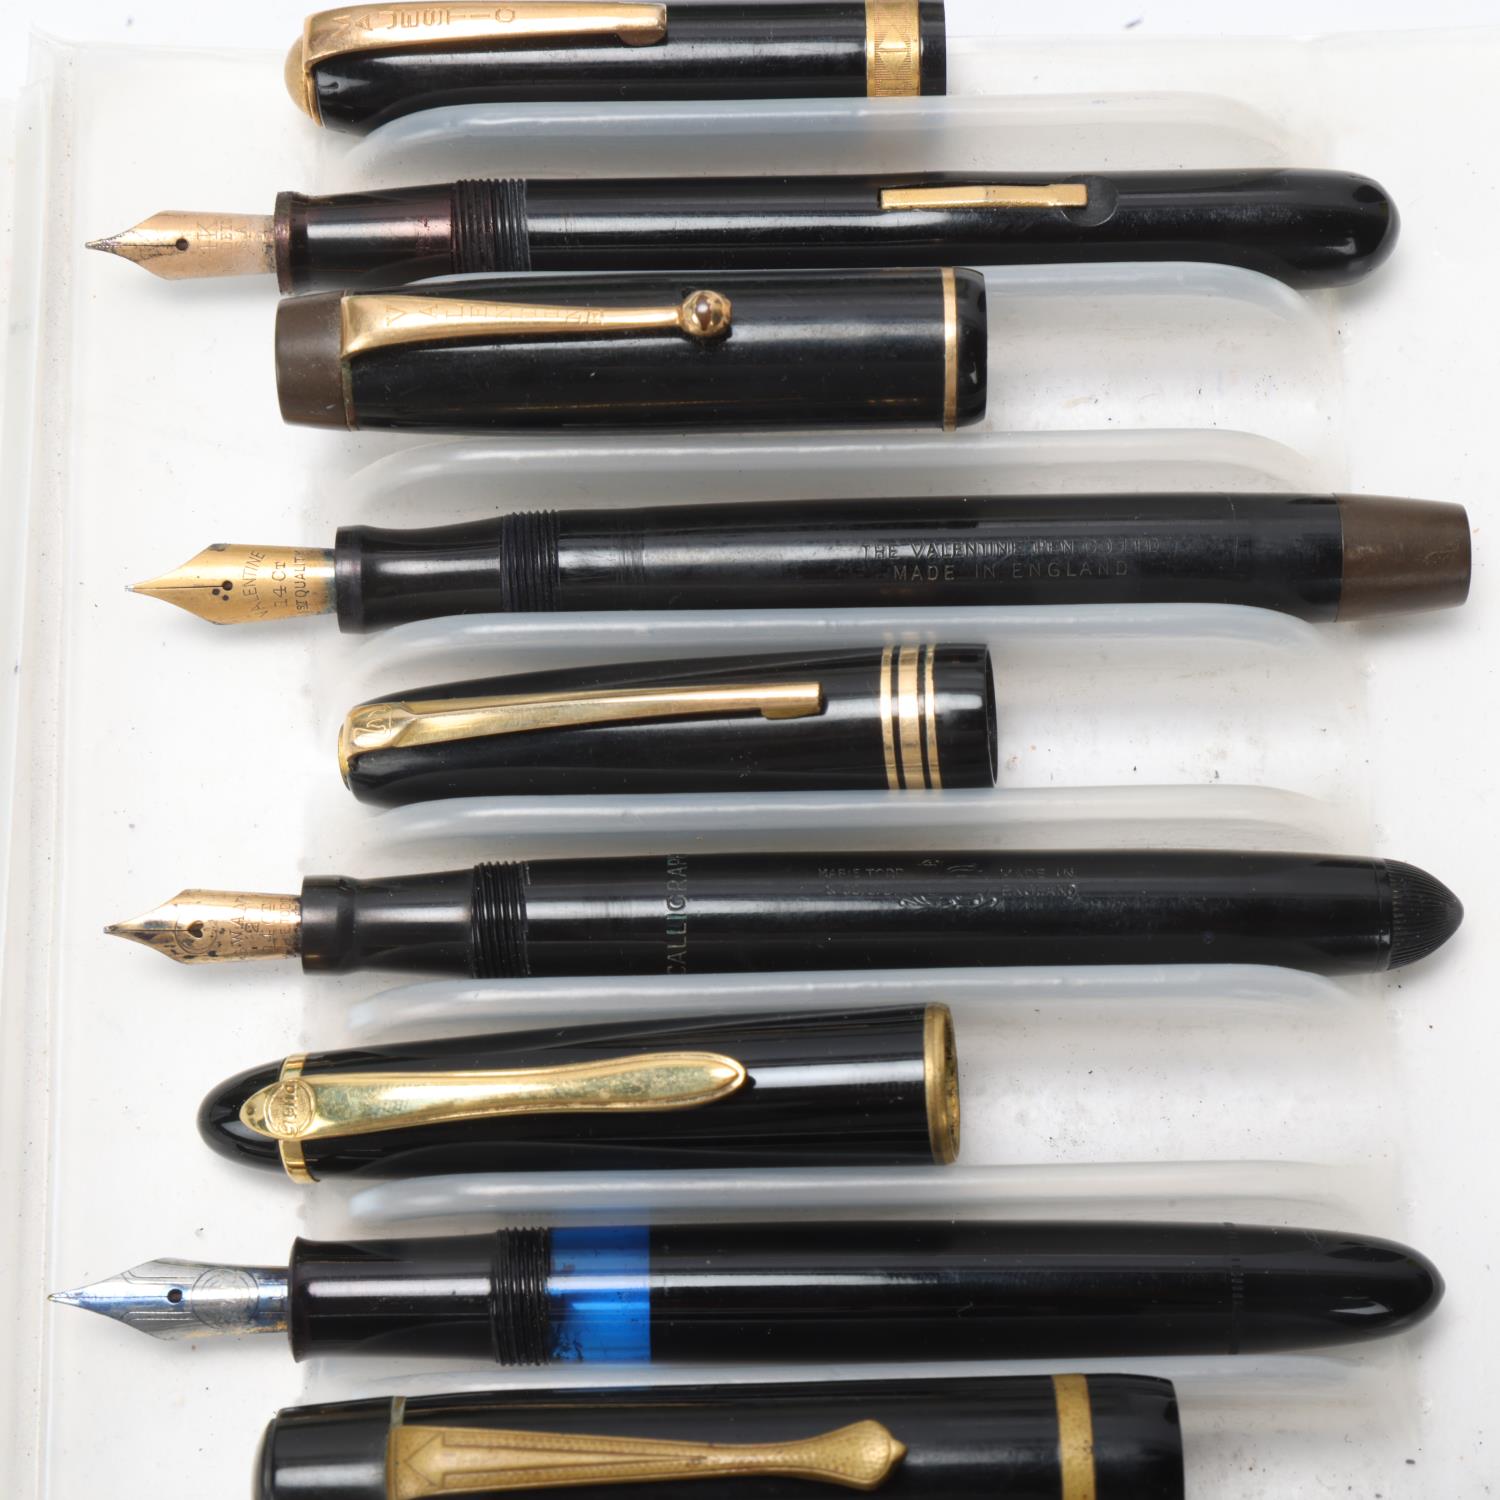 10 vintage fountain pens, early to mid 20th century, includes models by Mercedes, Swan(Mabie, Todd), - Image 3 of 4